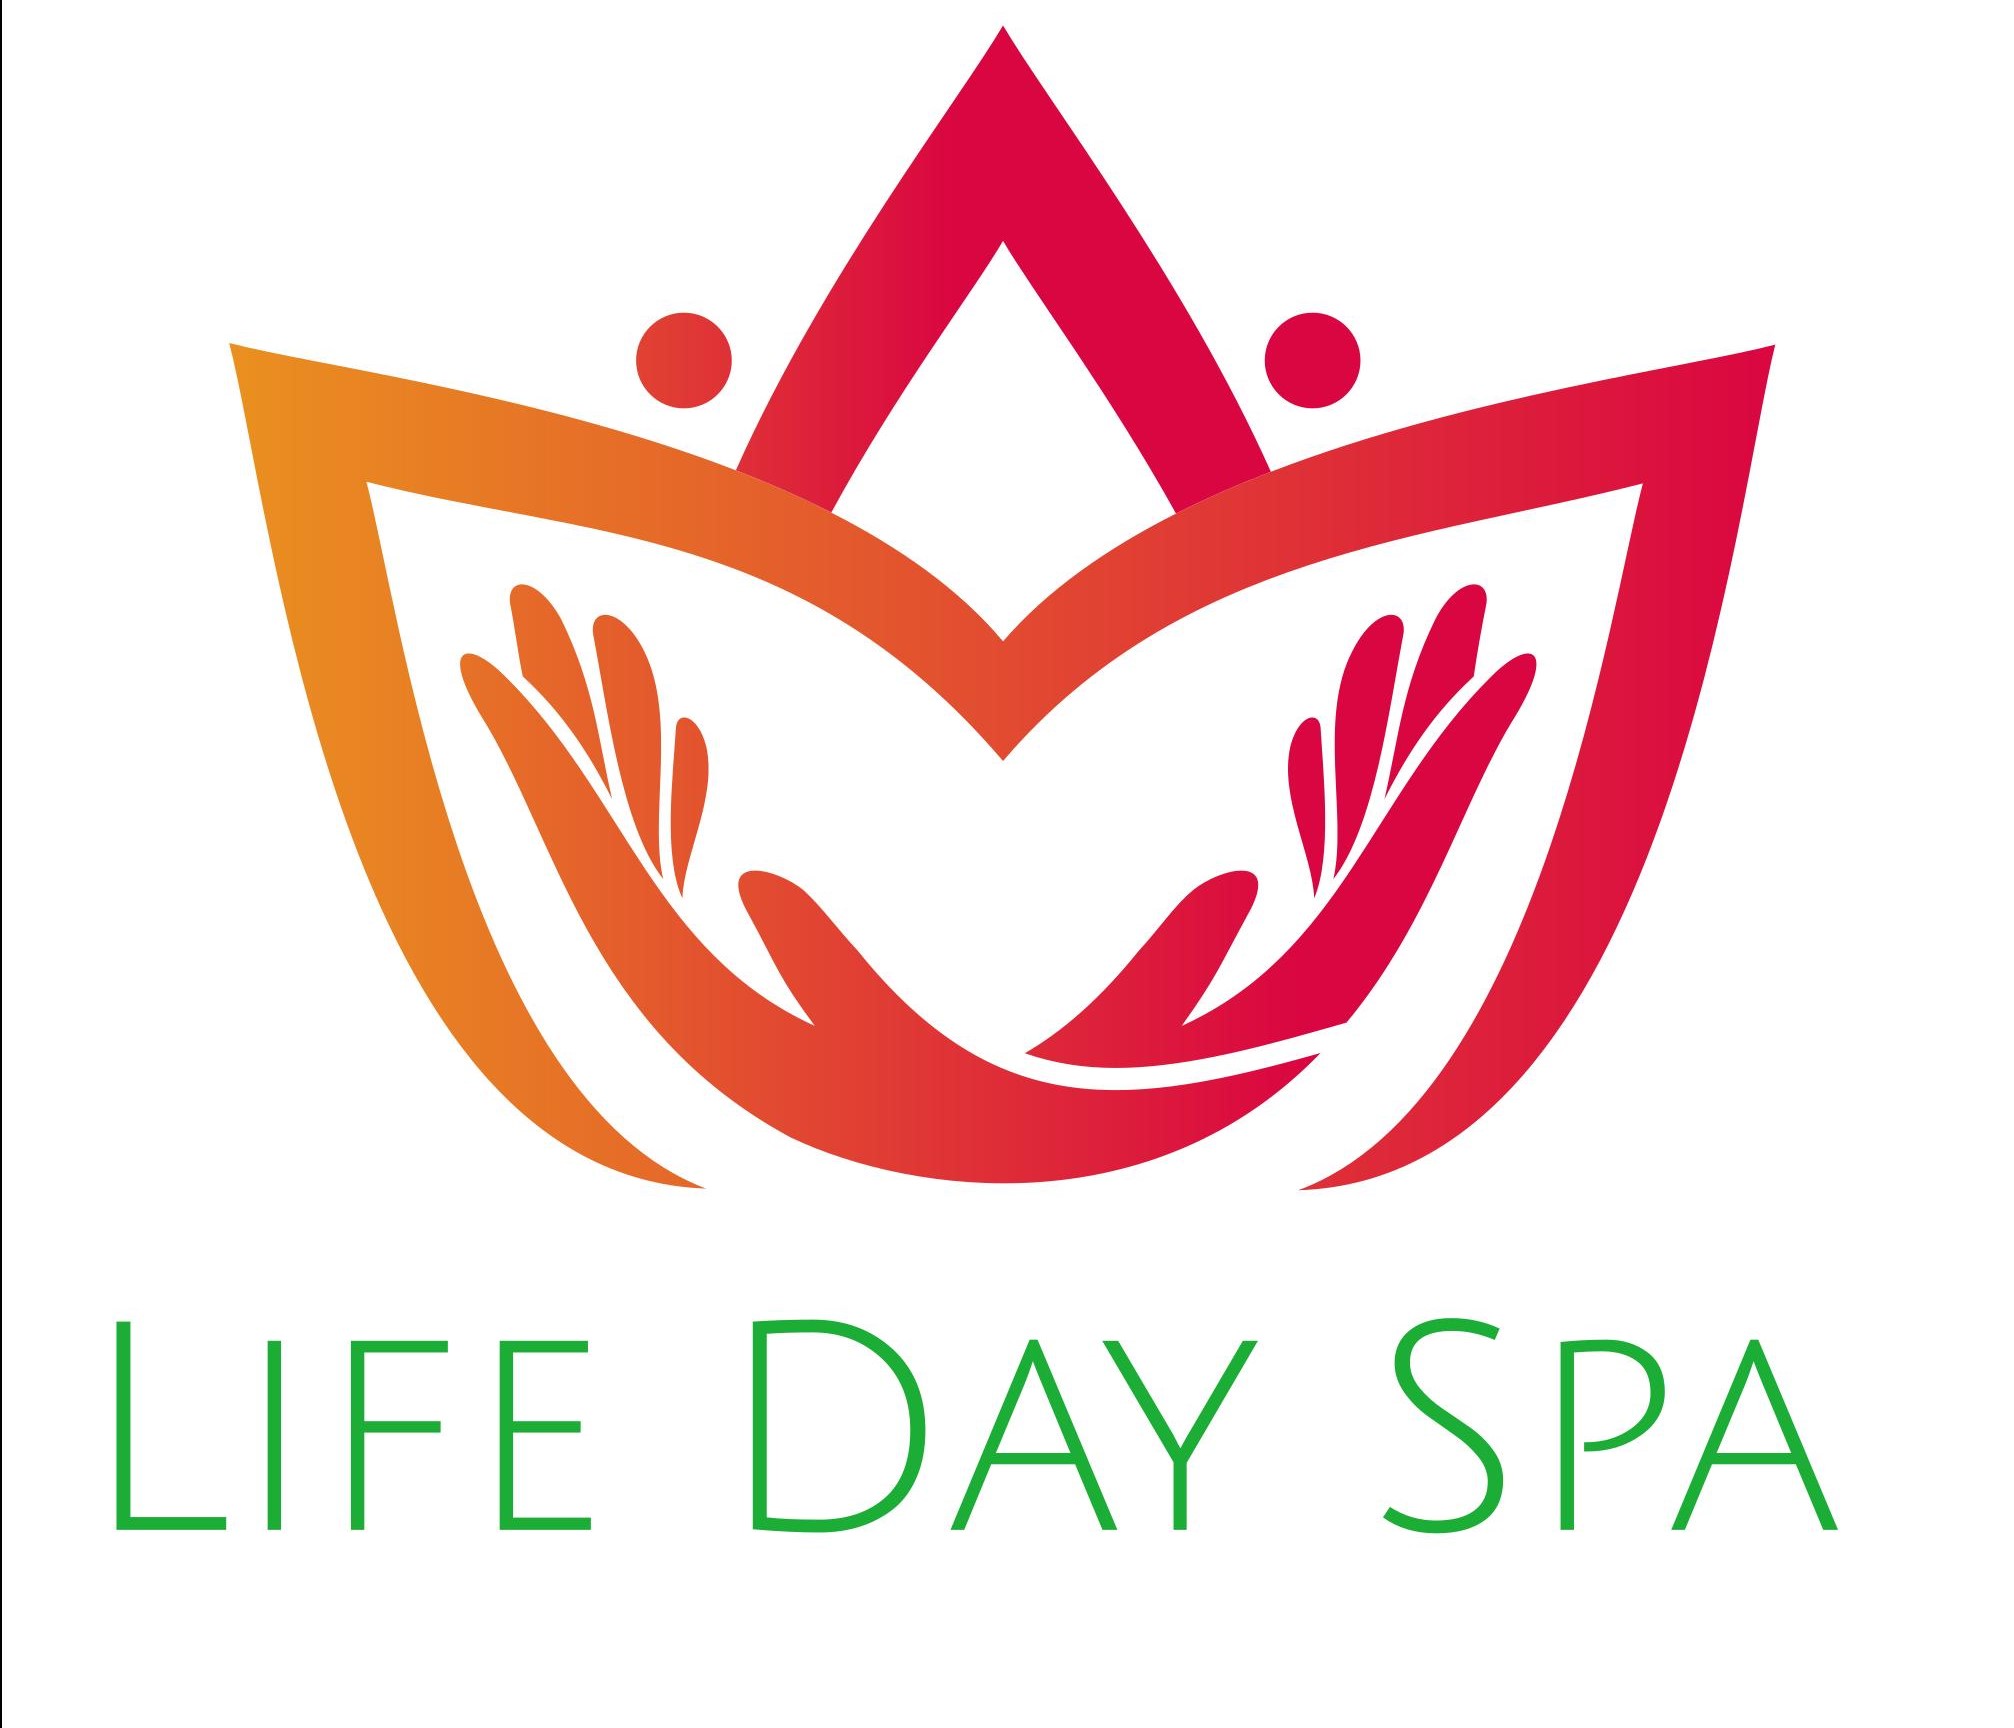 Life Day Spa